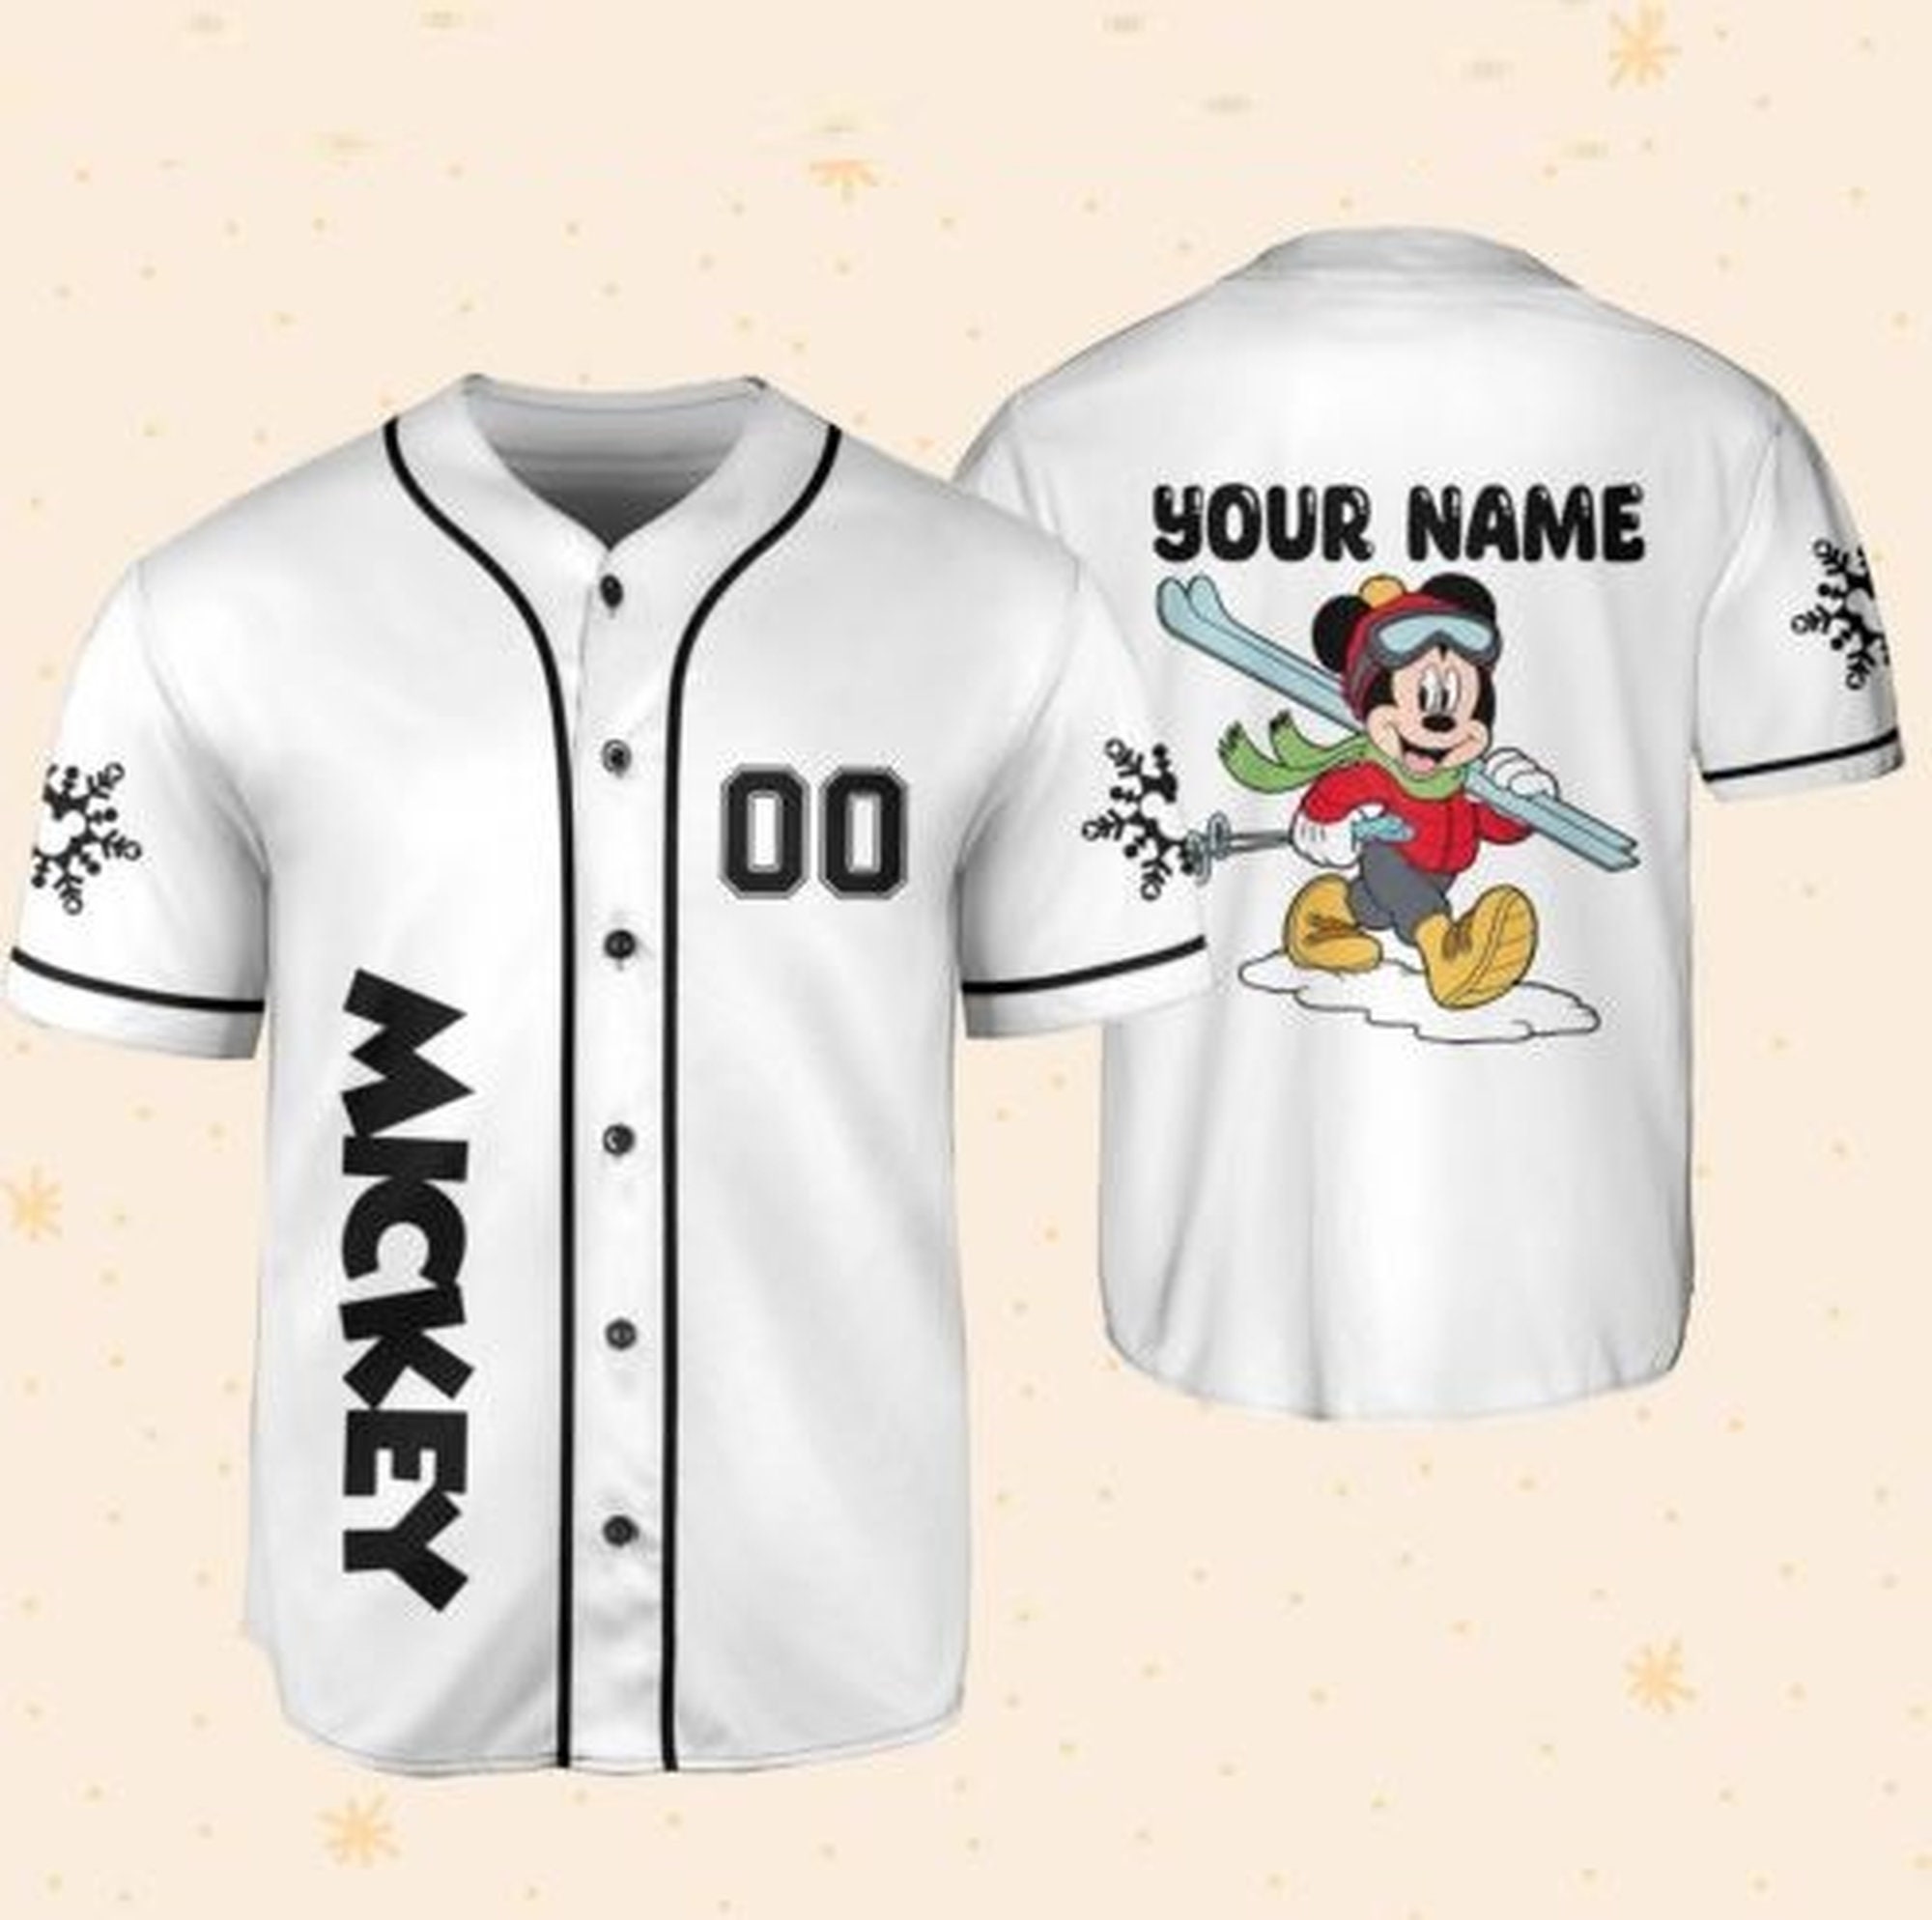 Discover Personalized Mickey Mouse 3D Baseball Jersey Shirt, Love Mickey Shirt, Disney Baseball Jersey, Mickey Mouse Gifts, Mickey Mouse Shirts